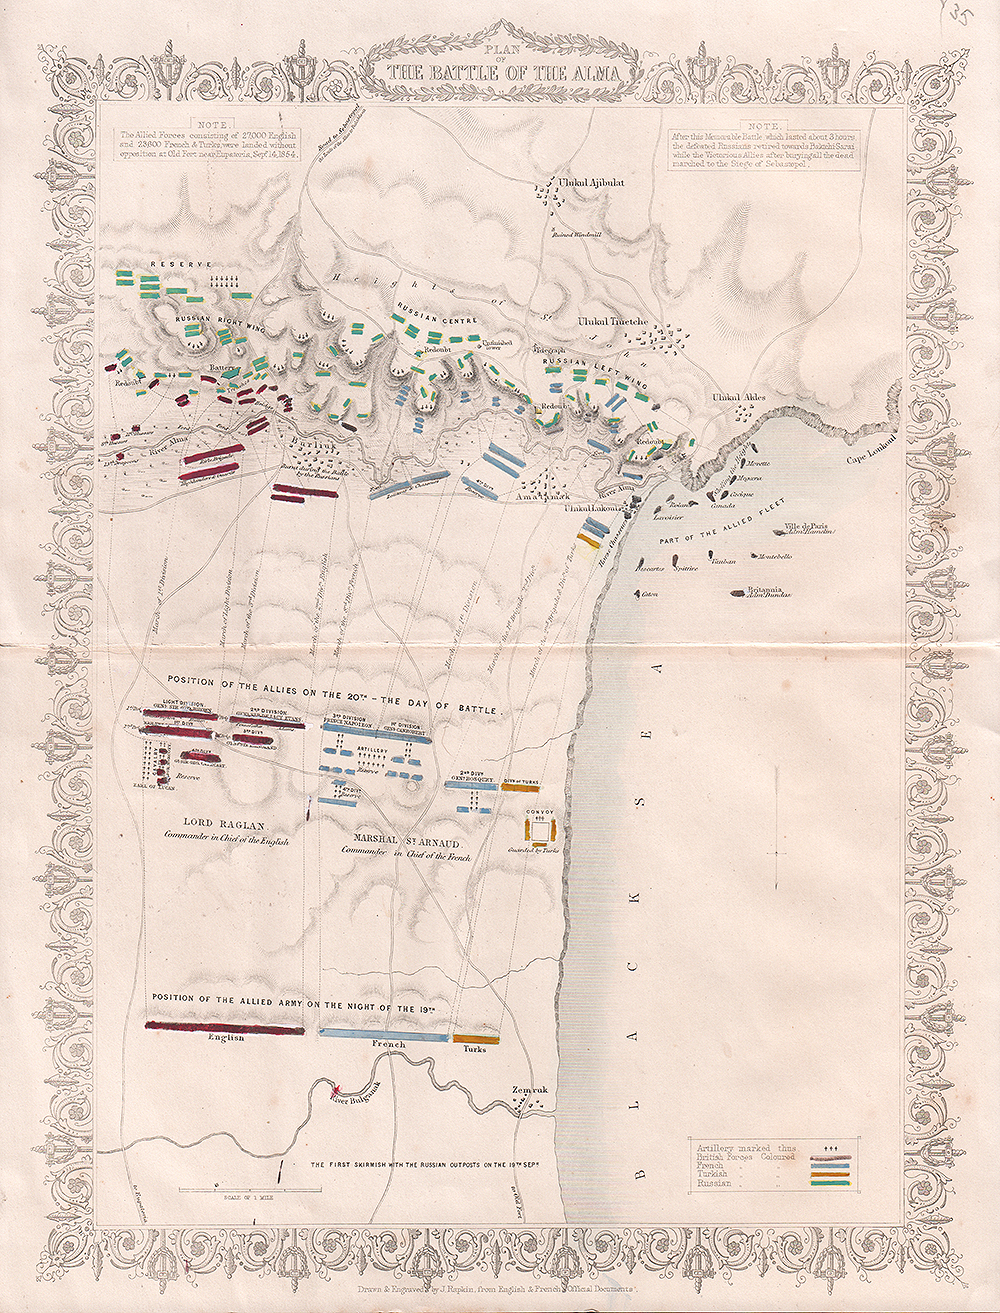 Plan of the Battle of the Alma